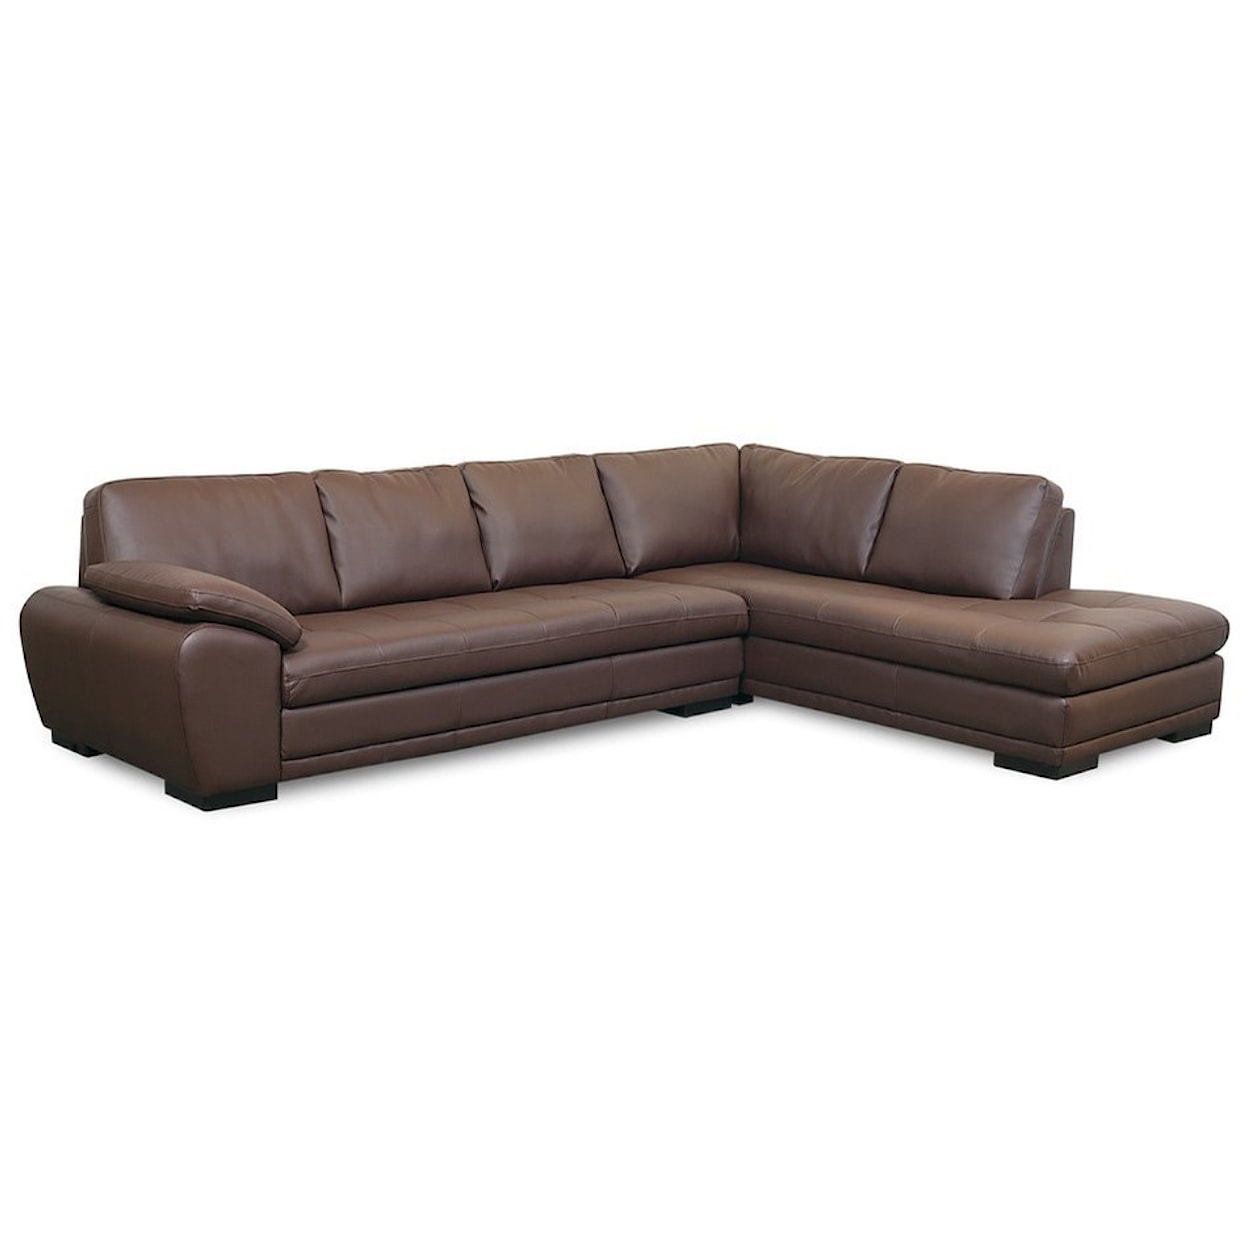 Palliser Miami Contemporary Sectional Sofa with Chaise